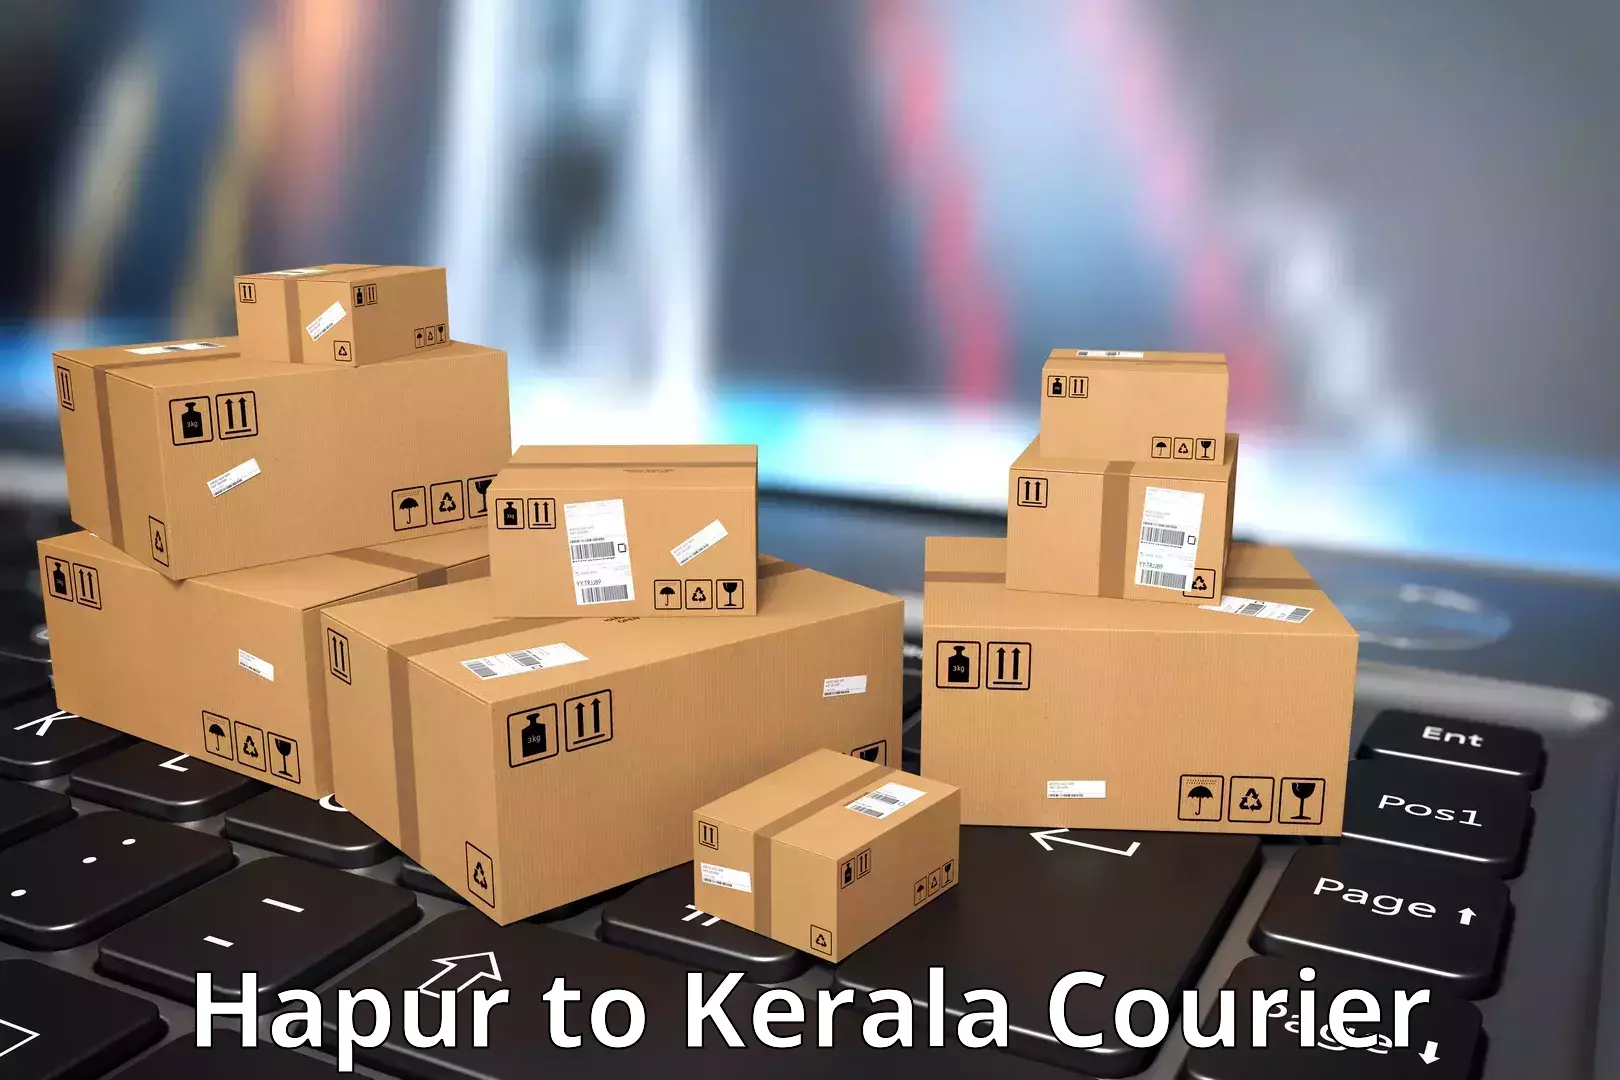 Express mail solutions Hapur to Cochin Port Kochi